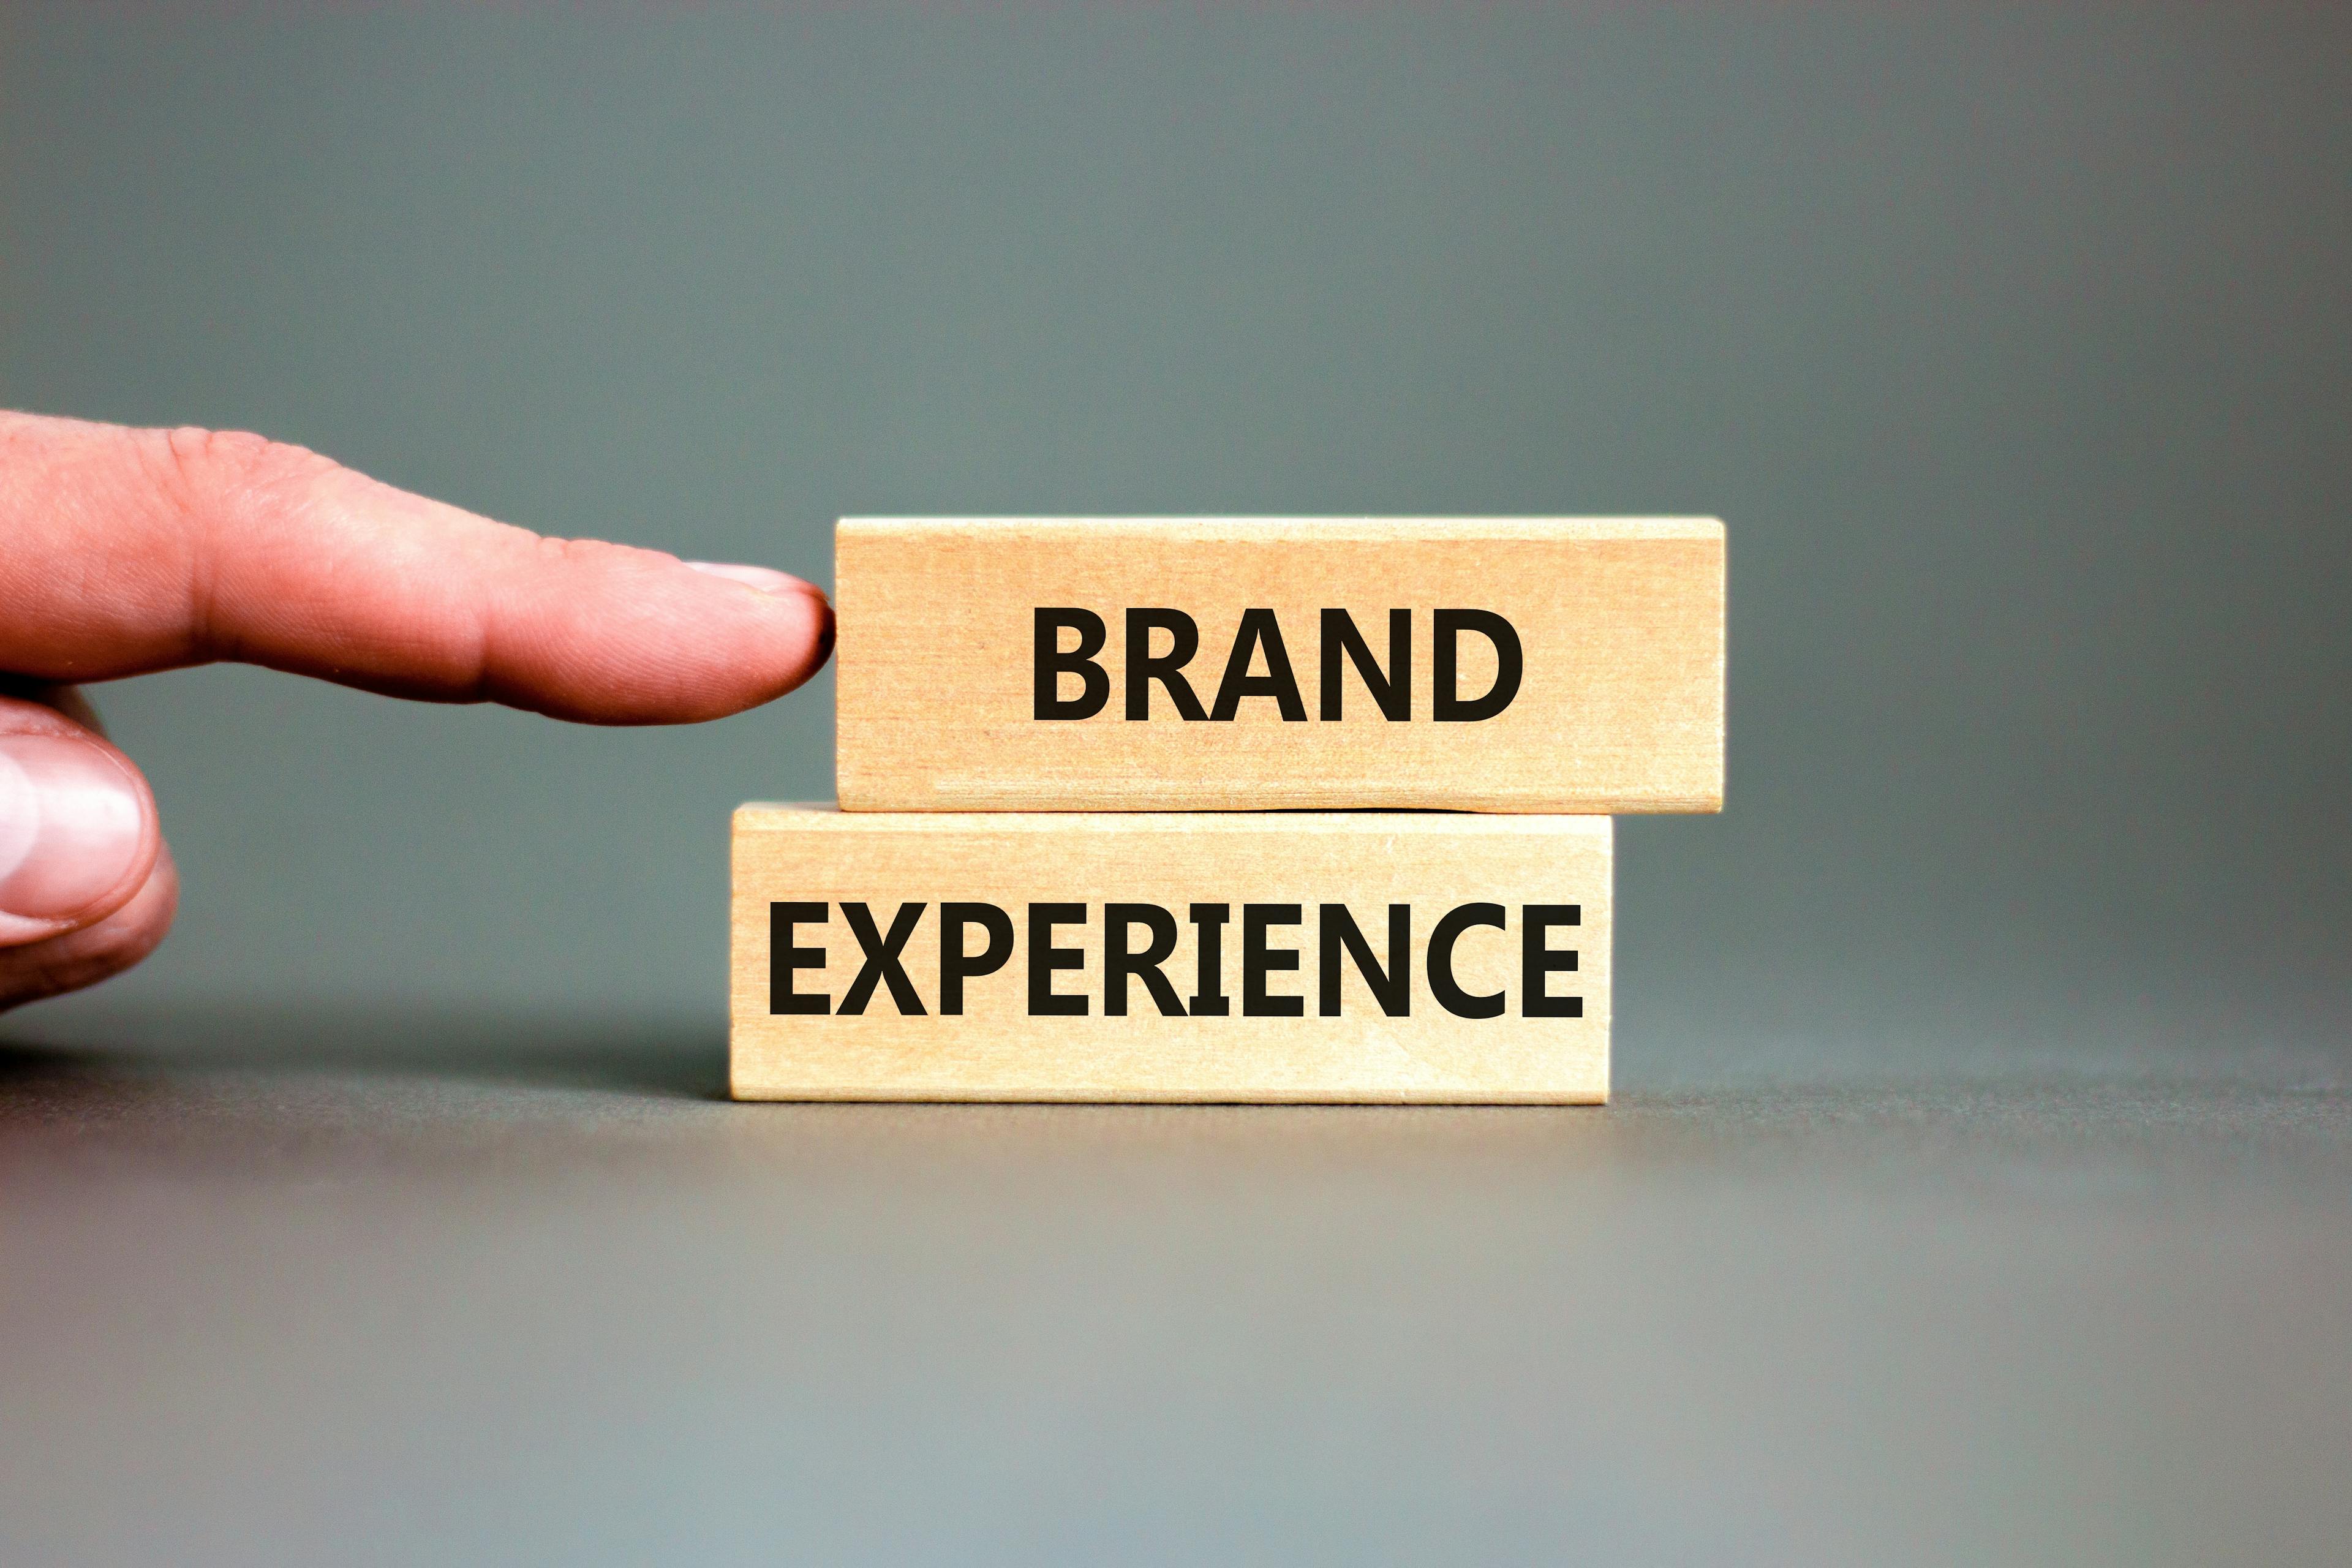 WHAT IS THE DIFFERENCE BETWEEN BRAND AND CUSTOMER EXPERIENCE?